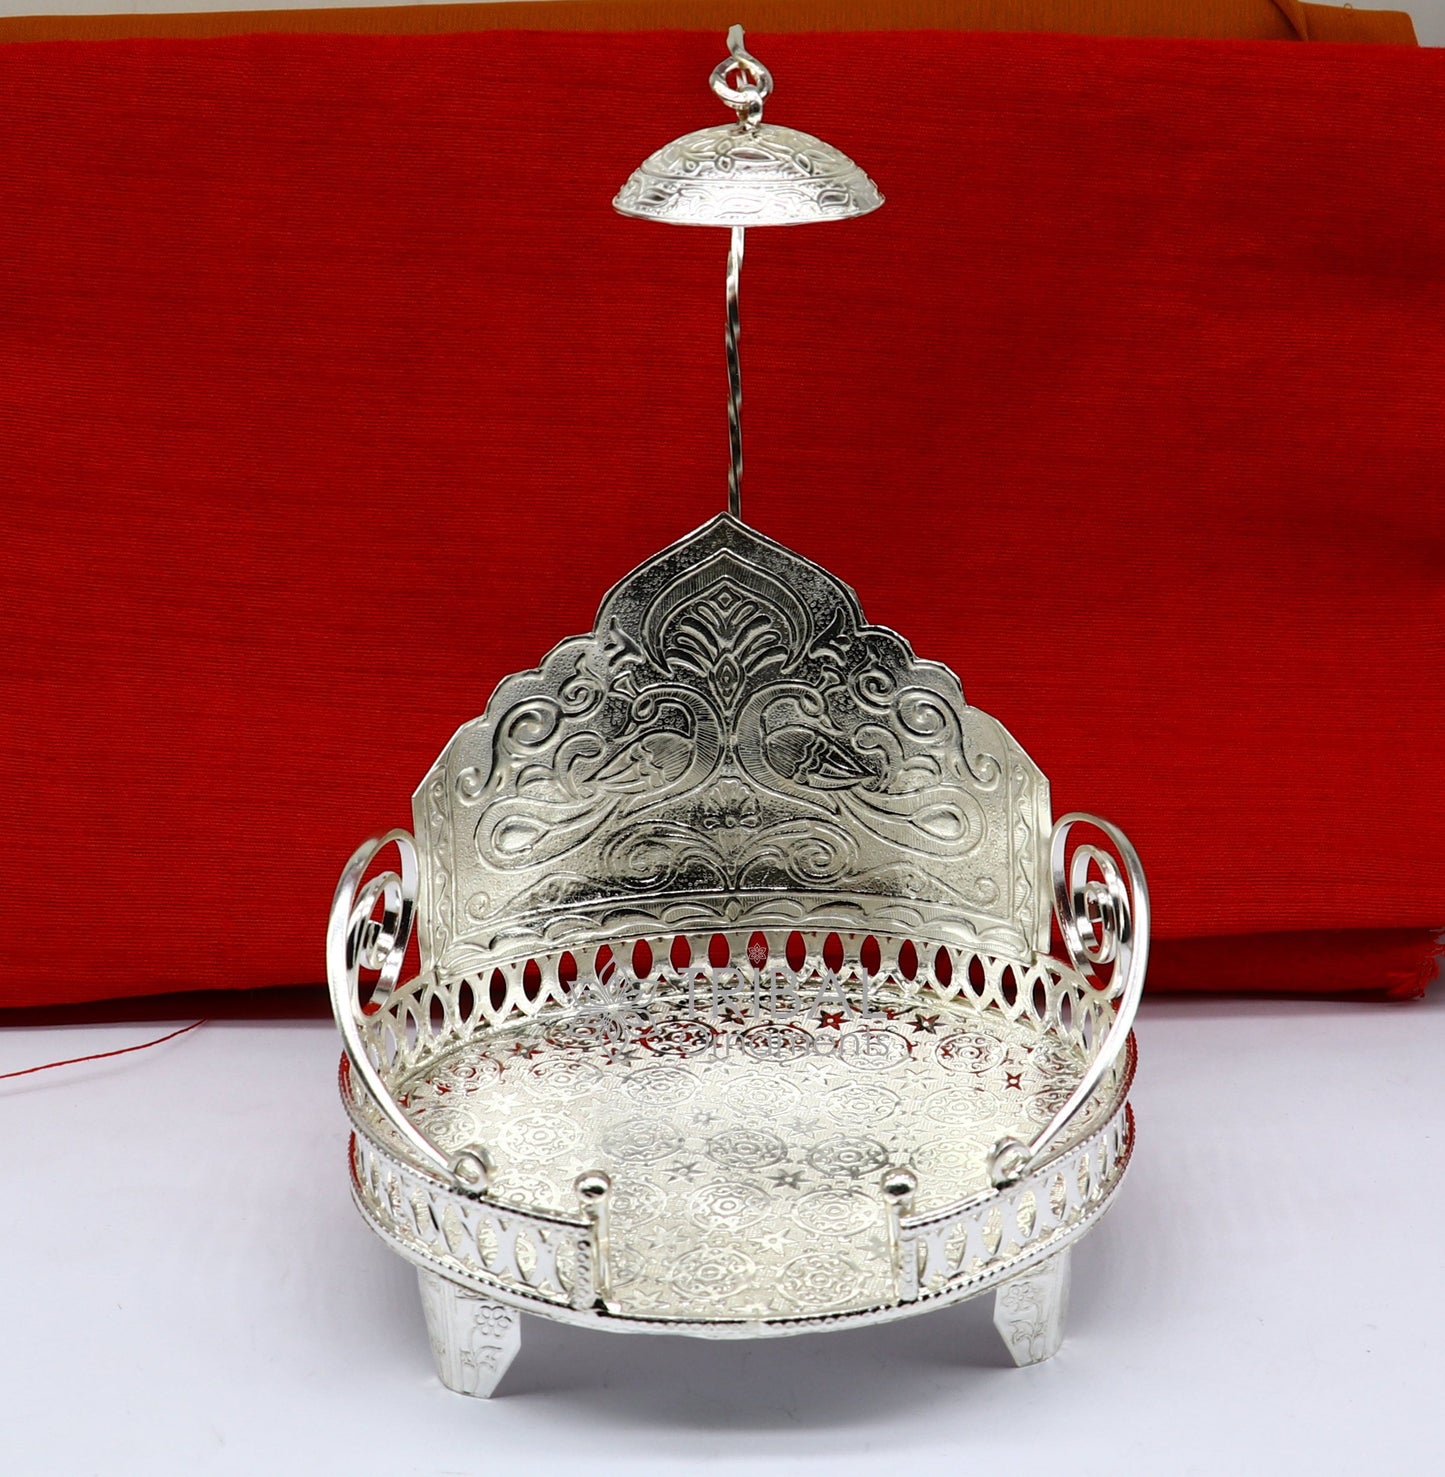 925 sterling silver sterling Sinhasan, singhasan idol god throne, god statue's divine chair, temple puja Chouki article article su1109 - TRIBAL ORNAMENTS